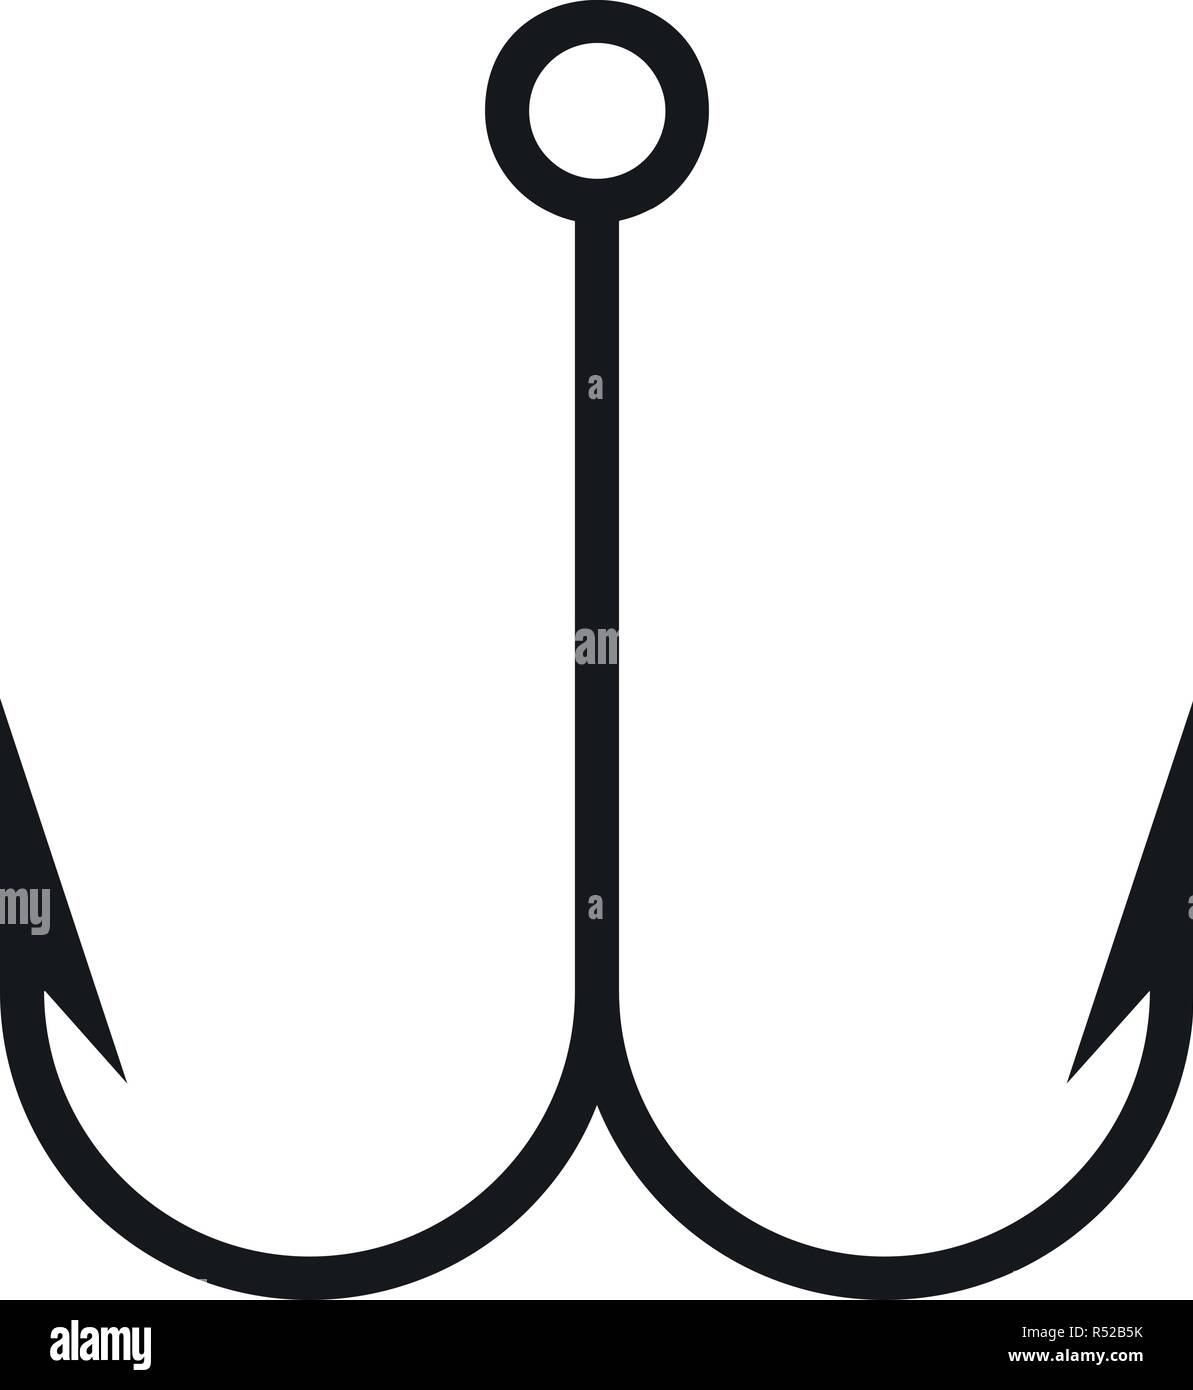 Double fish hook icon. Simple illustration of double fish hook